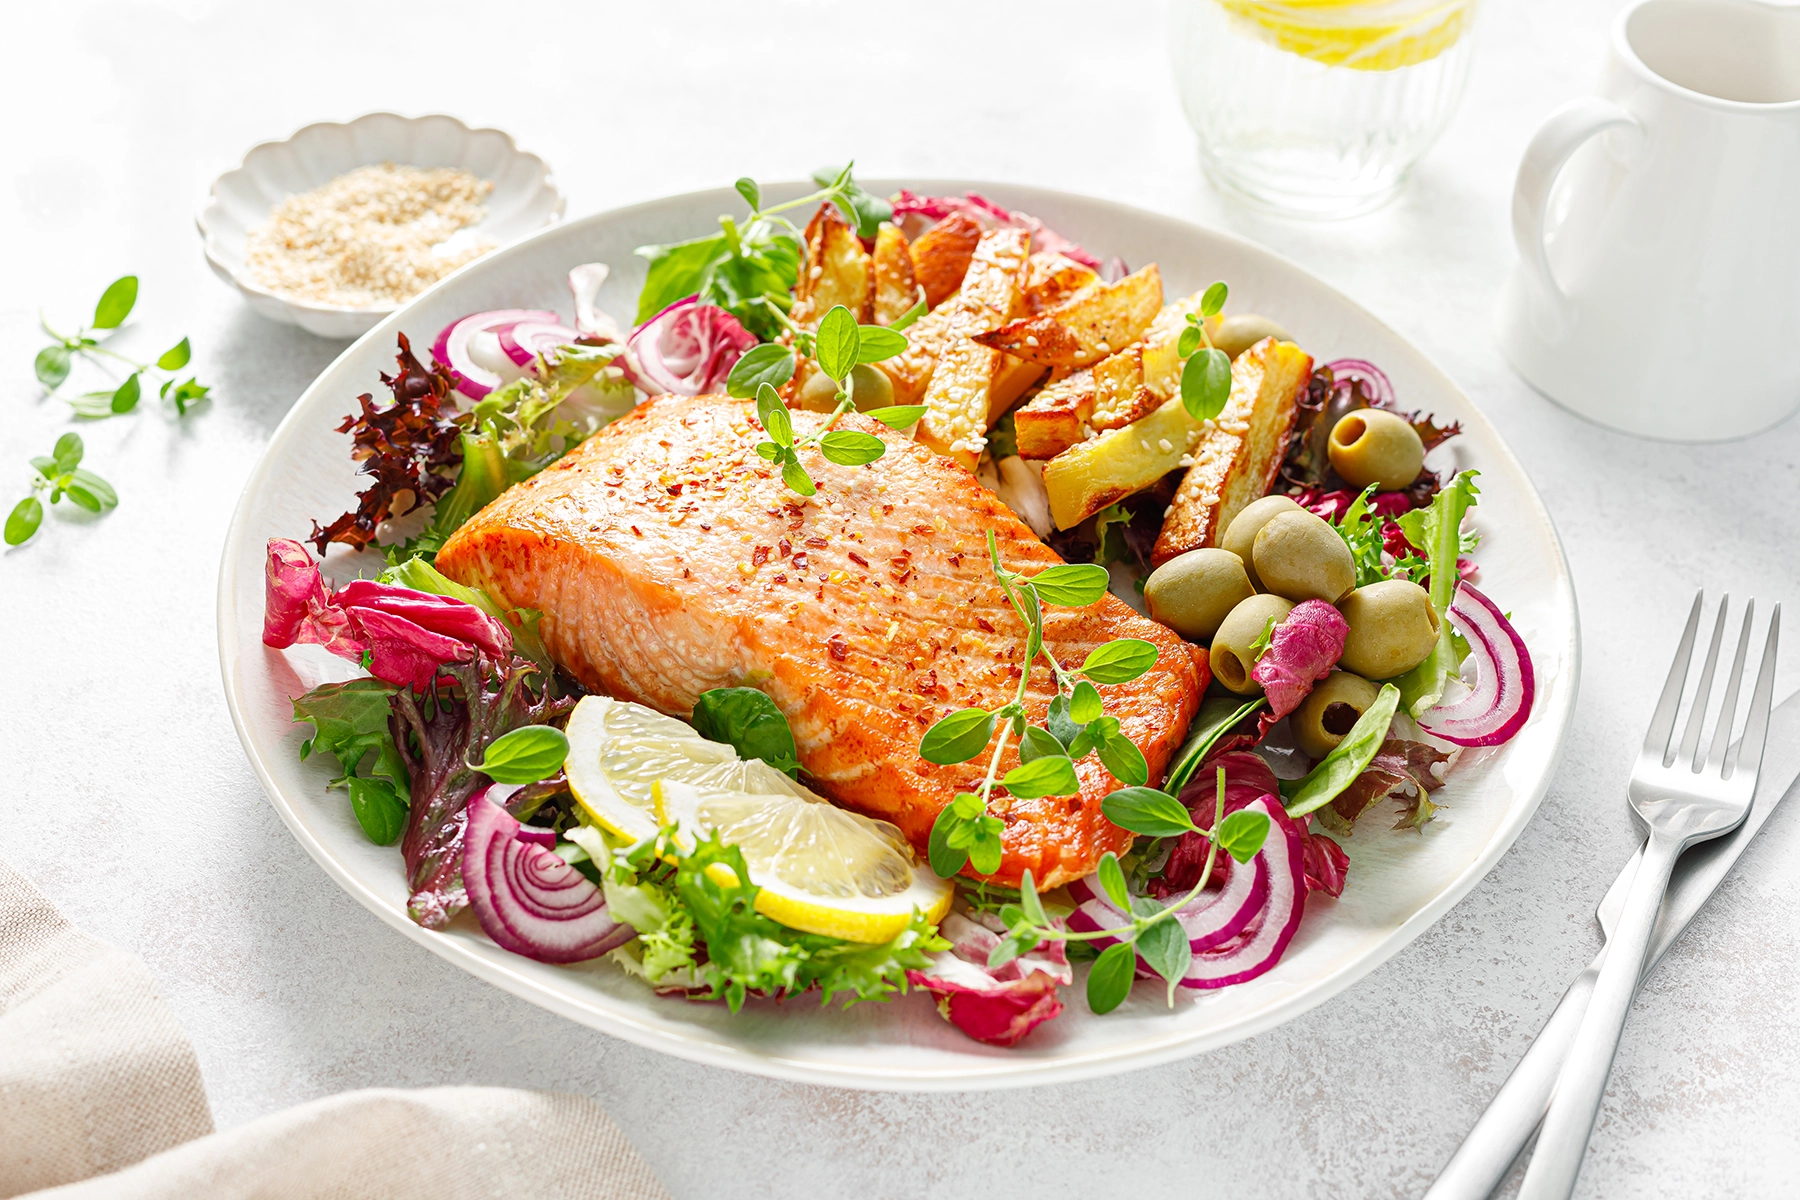 A bowl of salmon and salad, including olives, representing the Mediterranean diet.